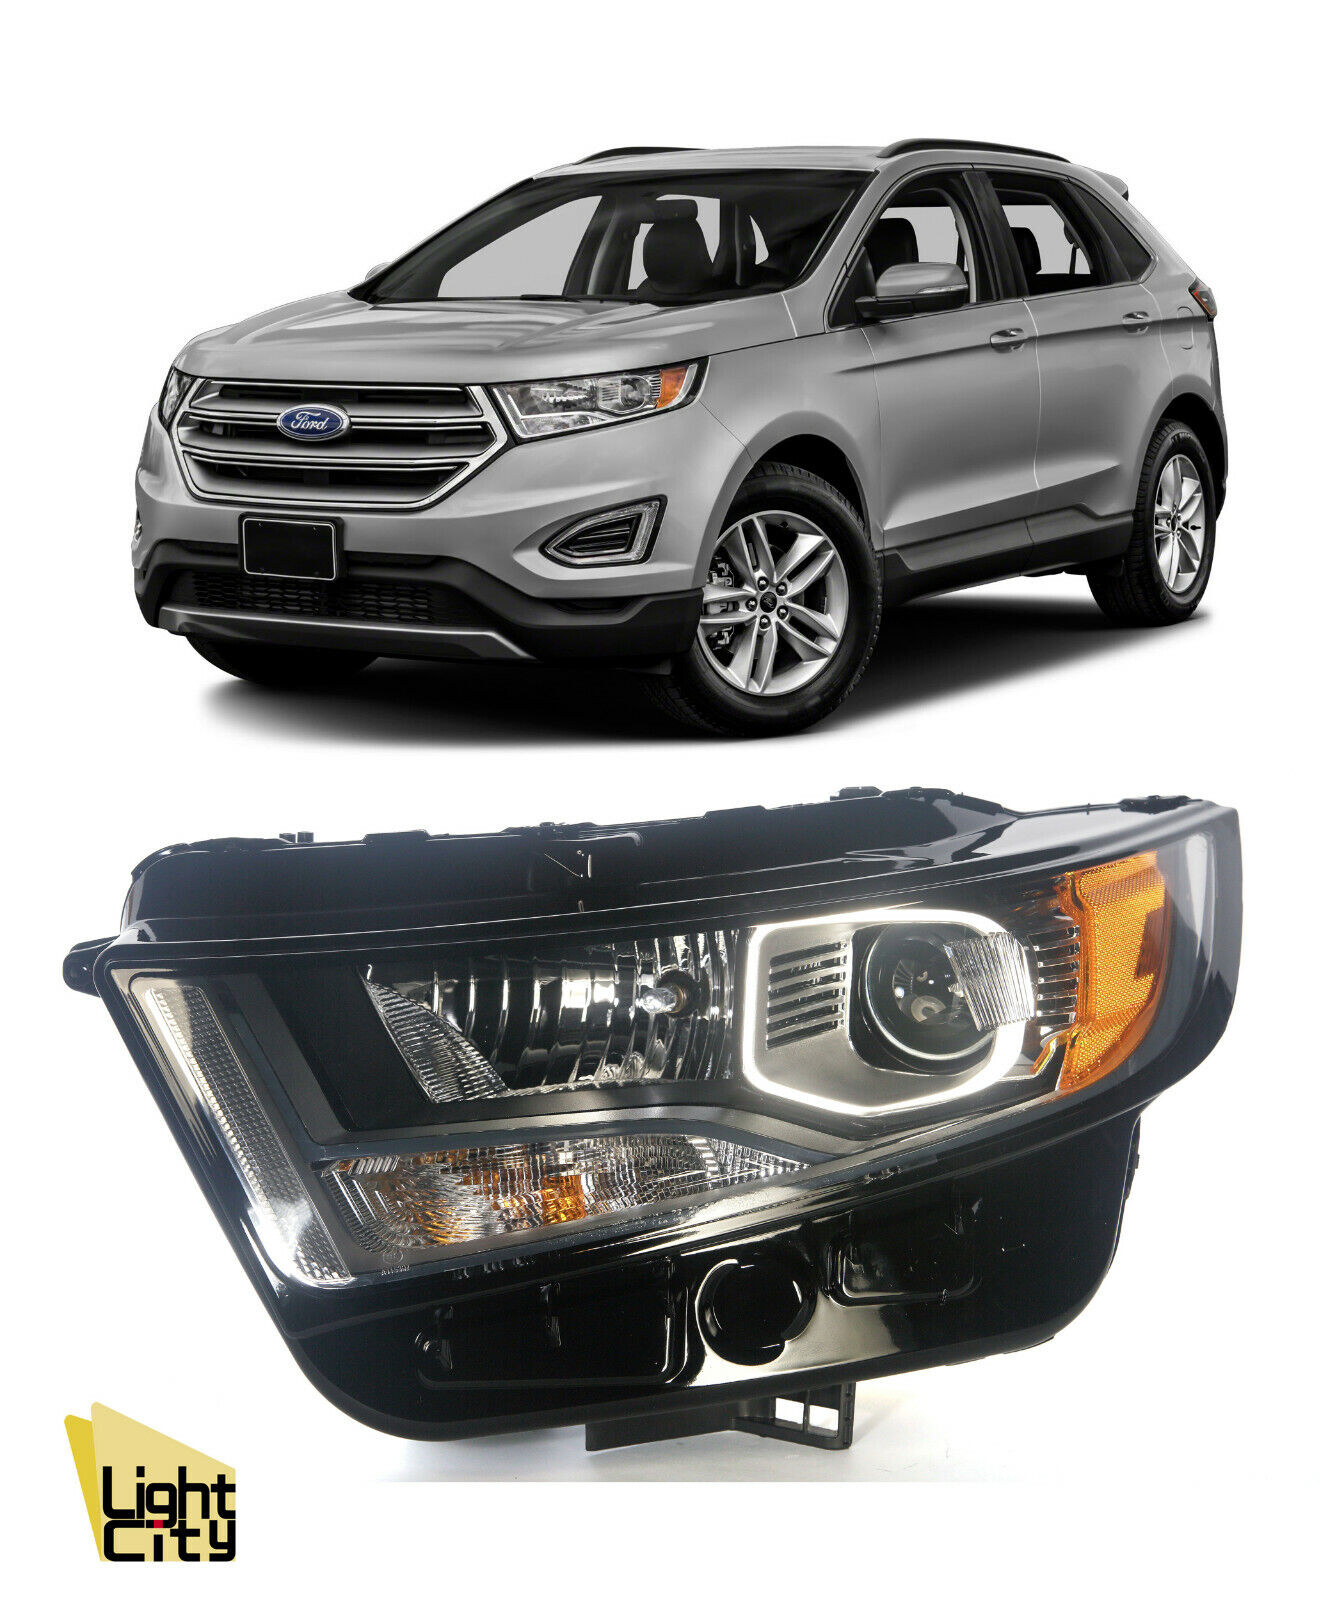 [Halogen] For 2015-2018 Ford Edge SE/SEL/TITANIUM Driver Headlight with Bulbs LH